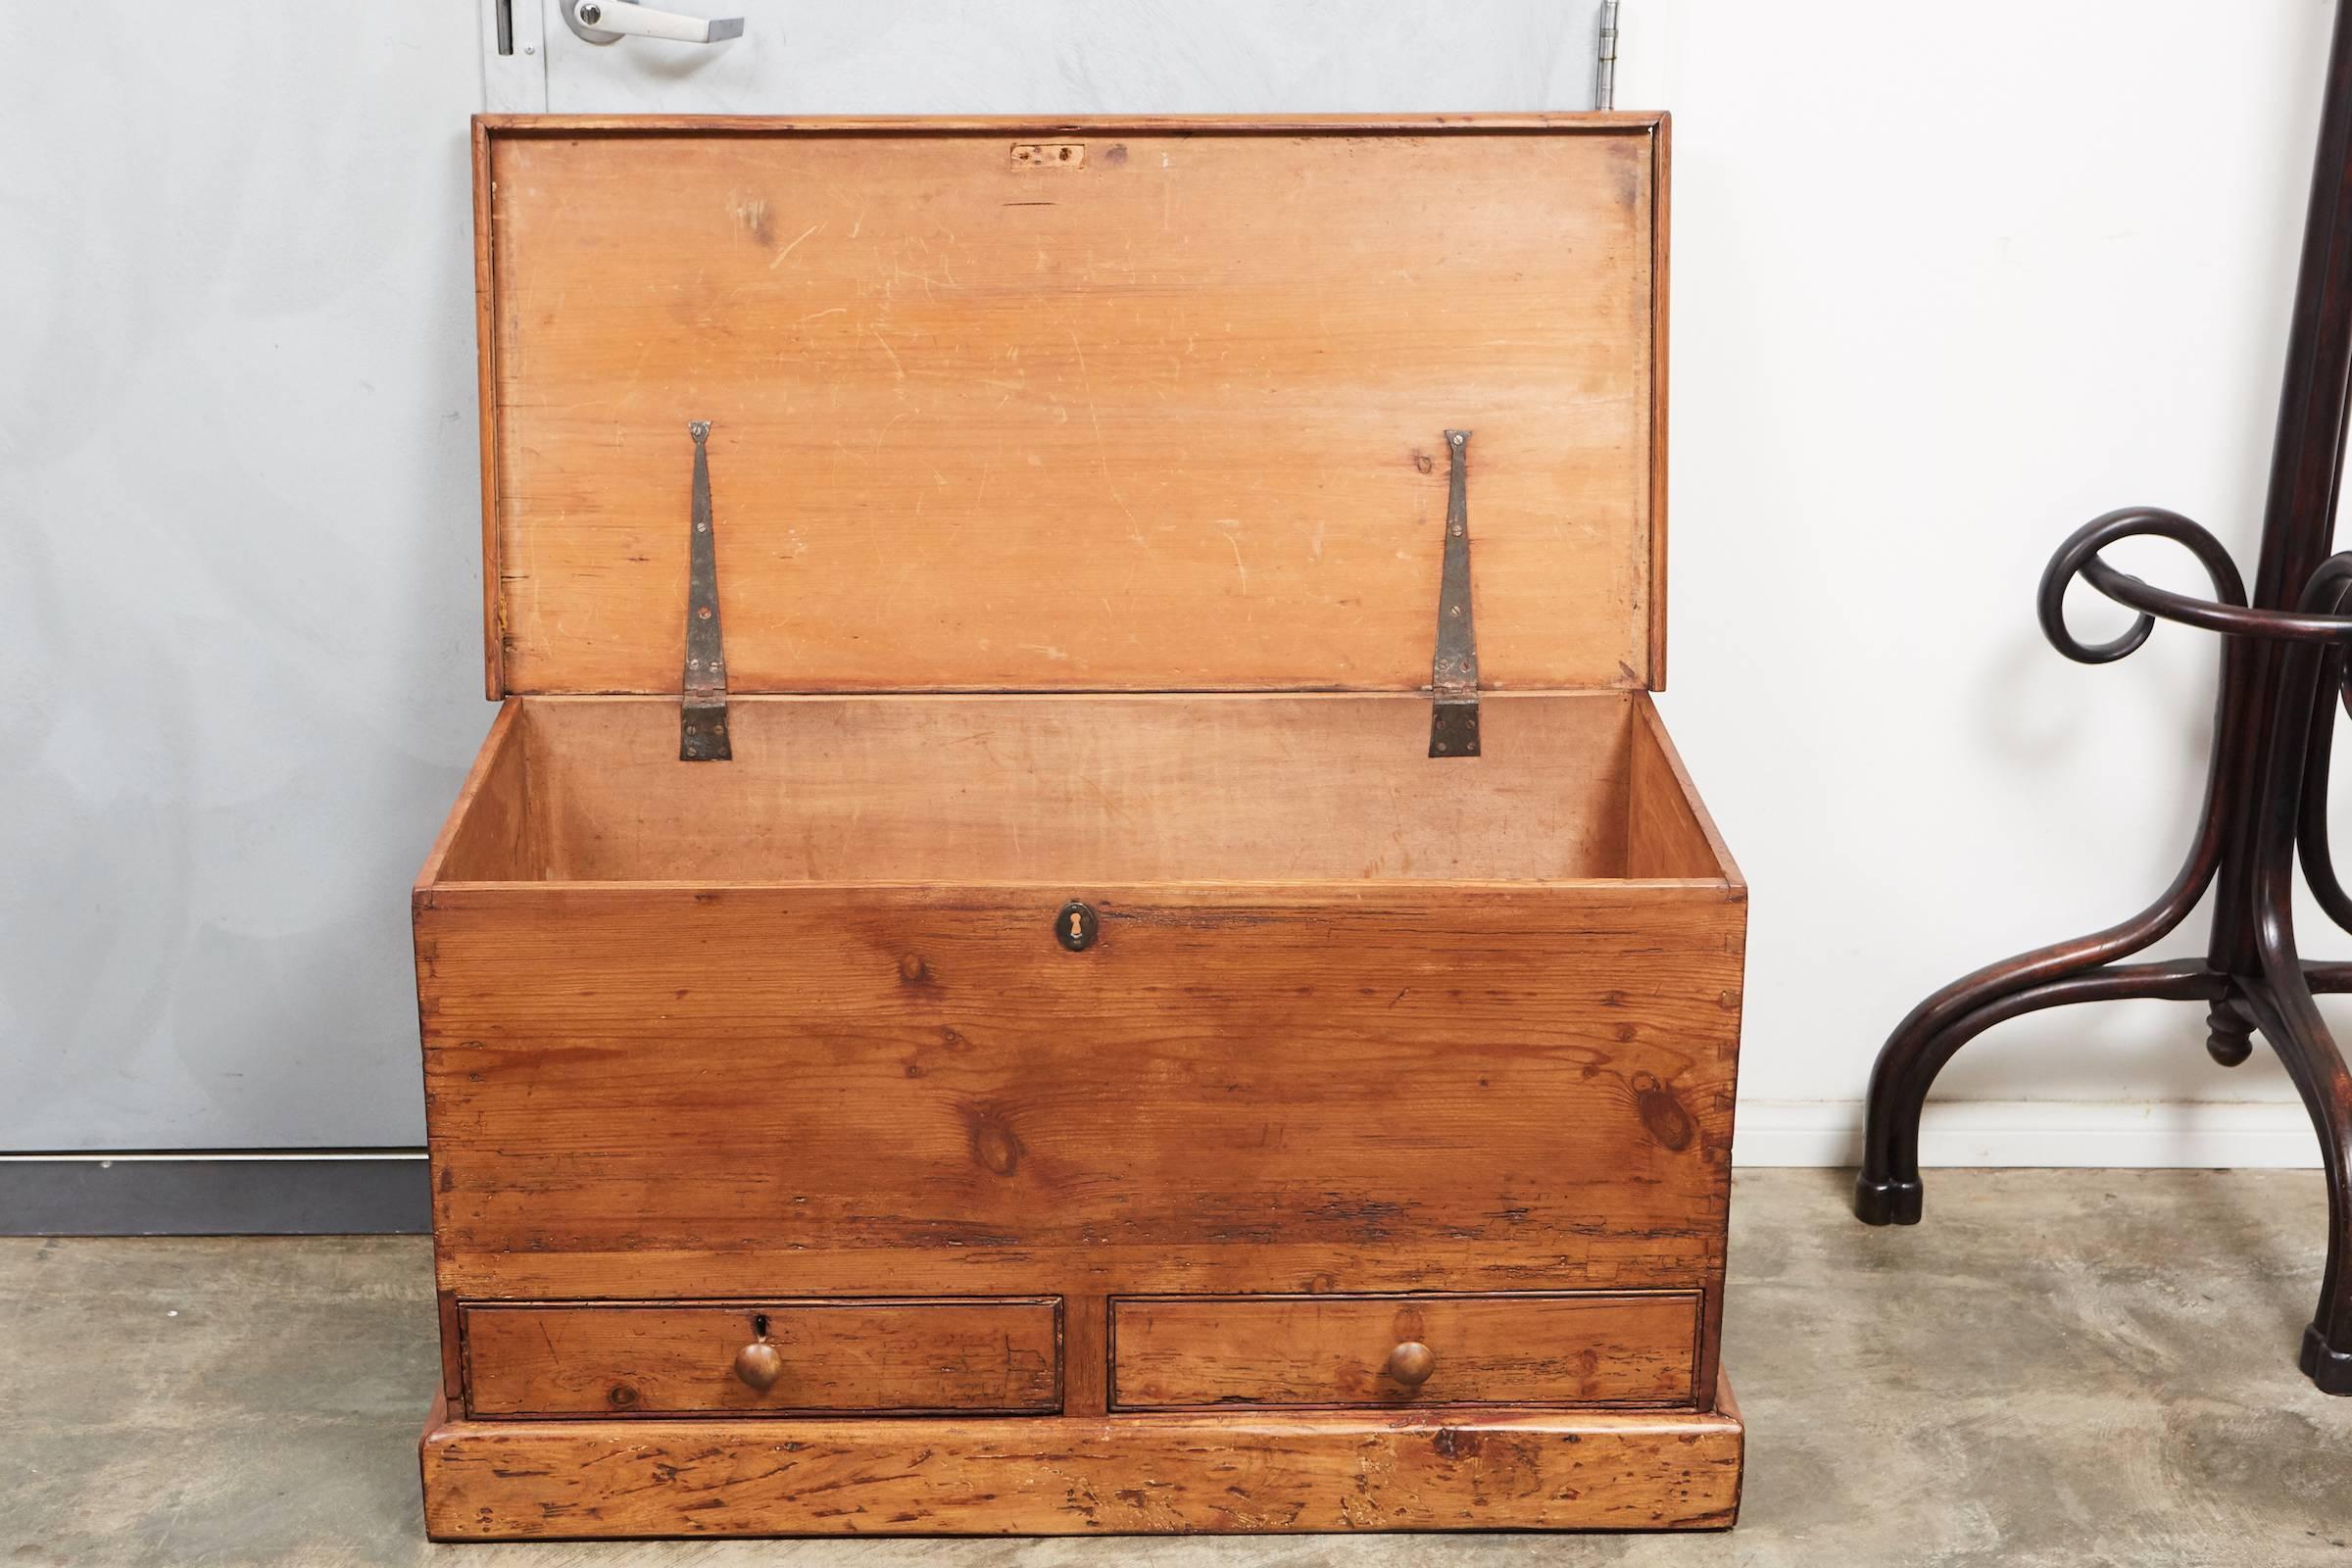 This handsome antique pine blanket box has two drawers and a stepped base. The handcrafted construction dates it to the early 19th century.
  